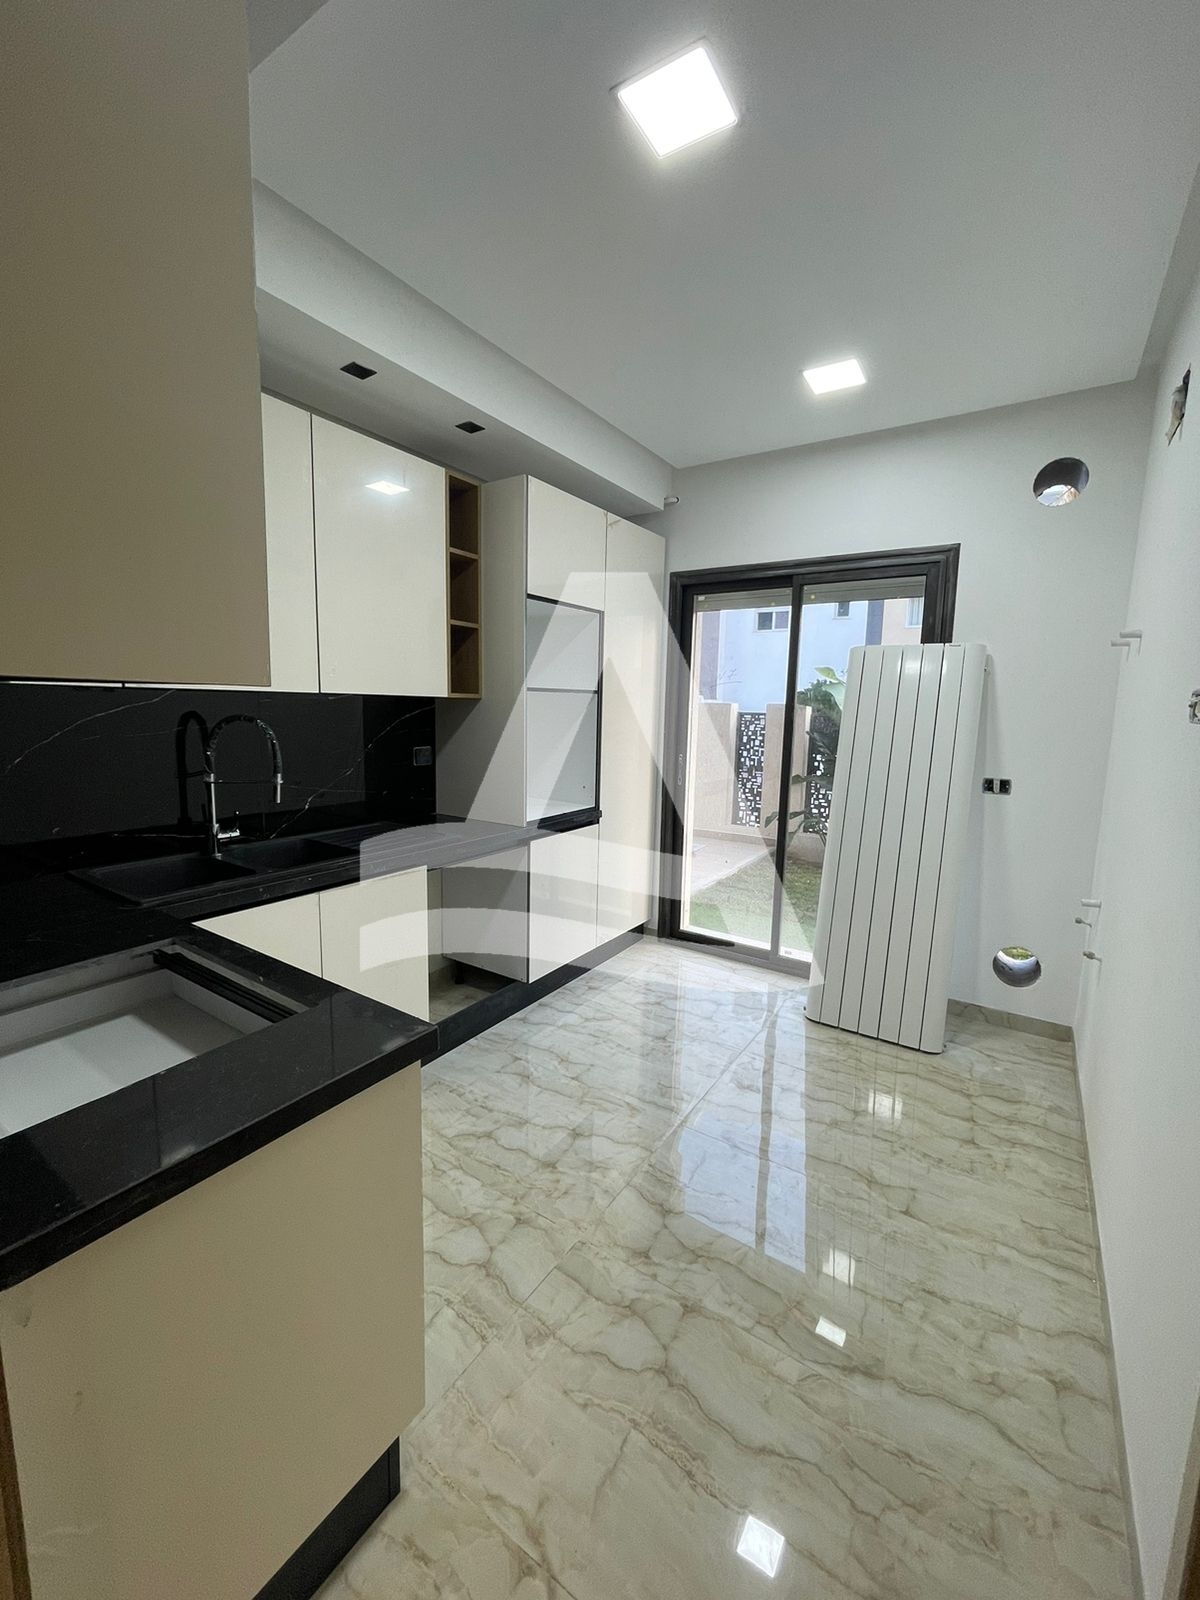 location appartement s+2 neuf a ain zaghouen nord image 2